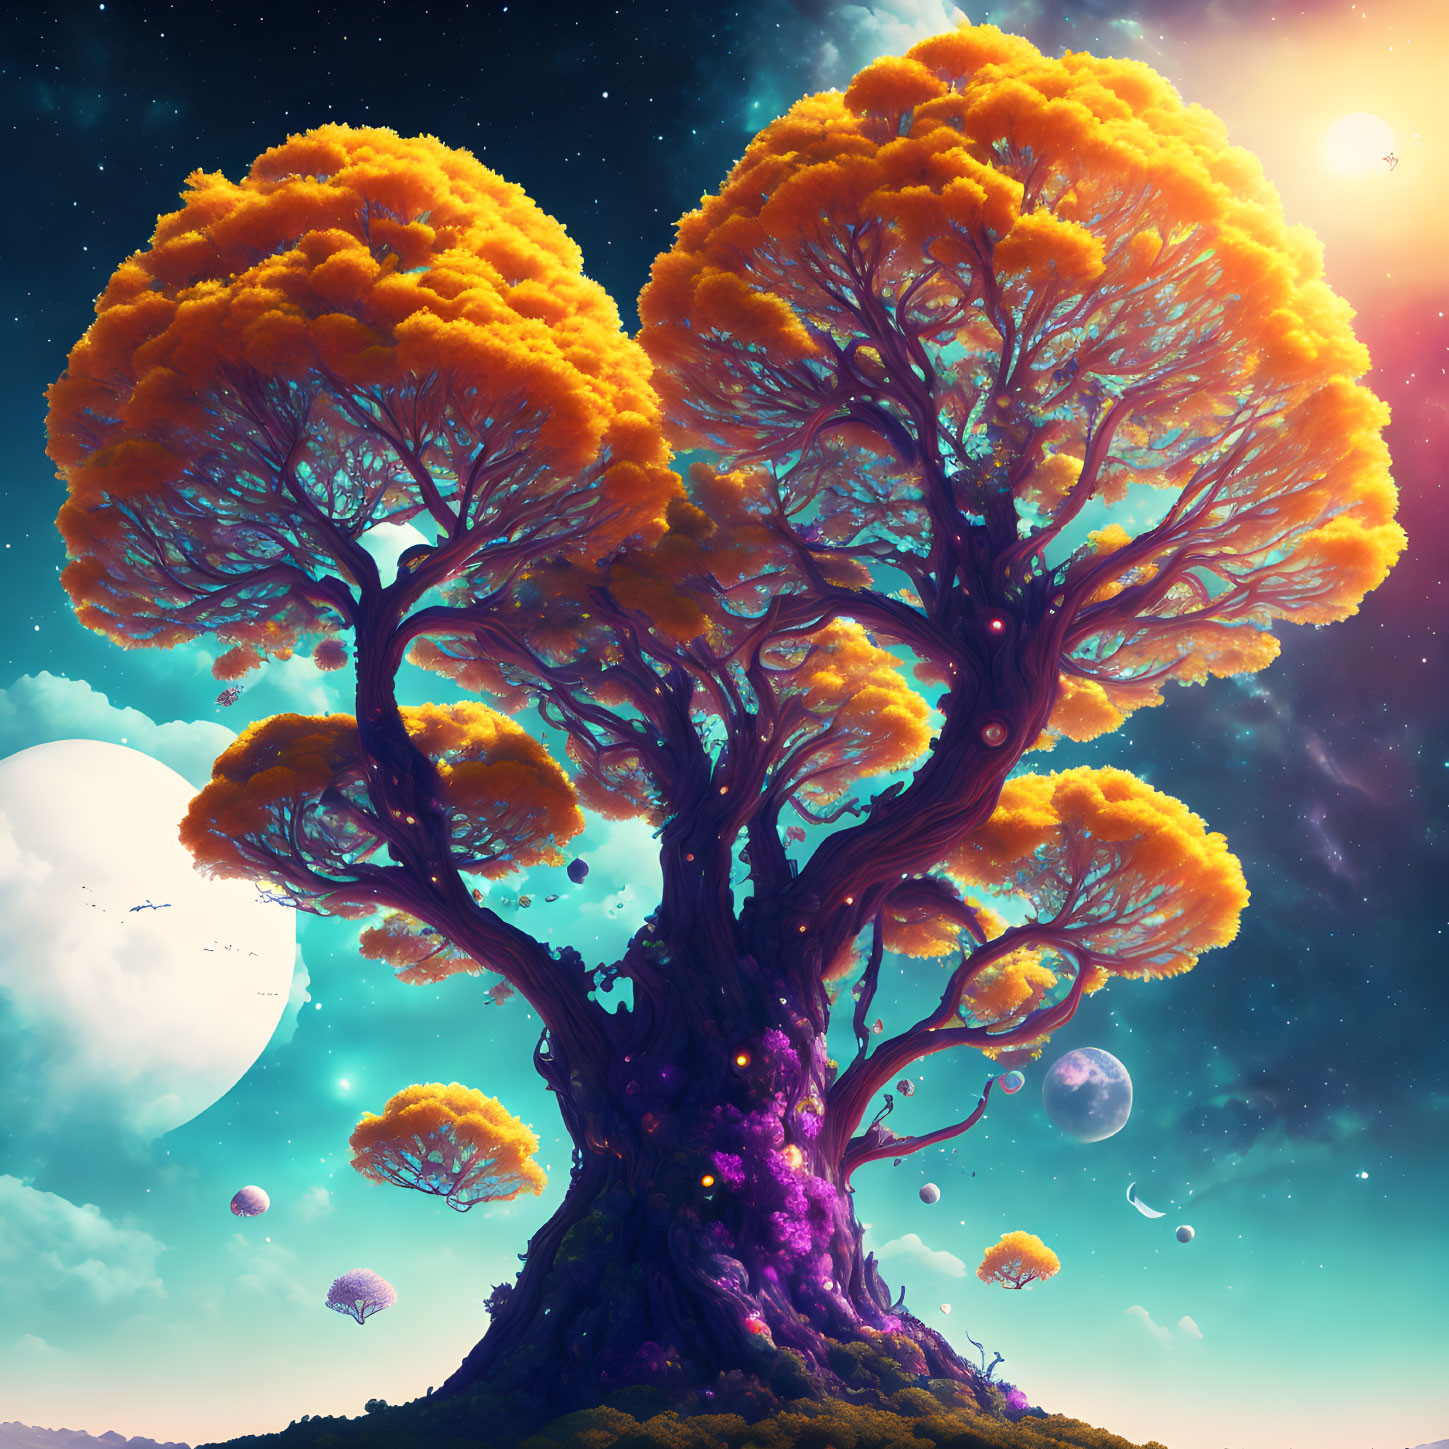 Vibrant surreal landscape with massive tree, moons, and distant sun.